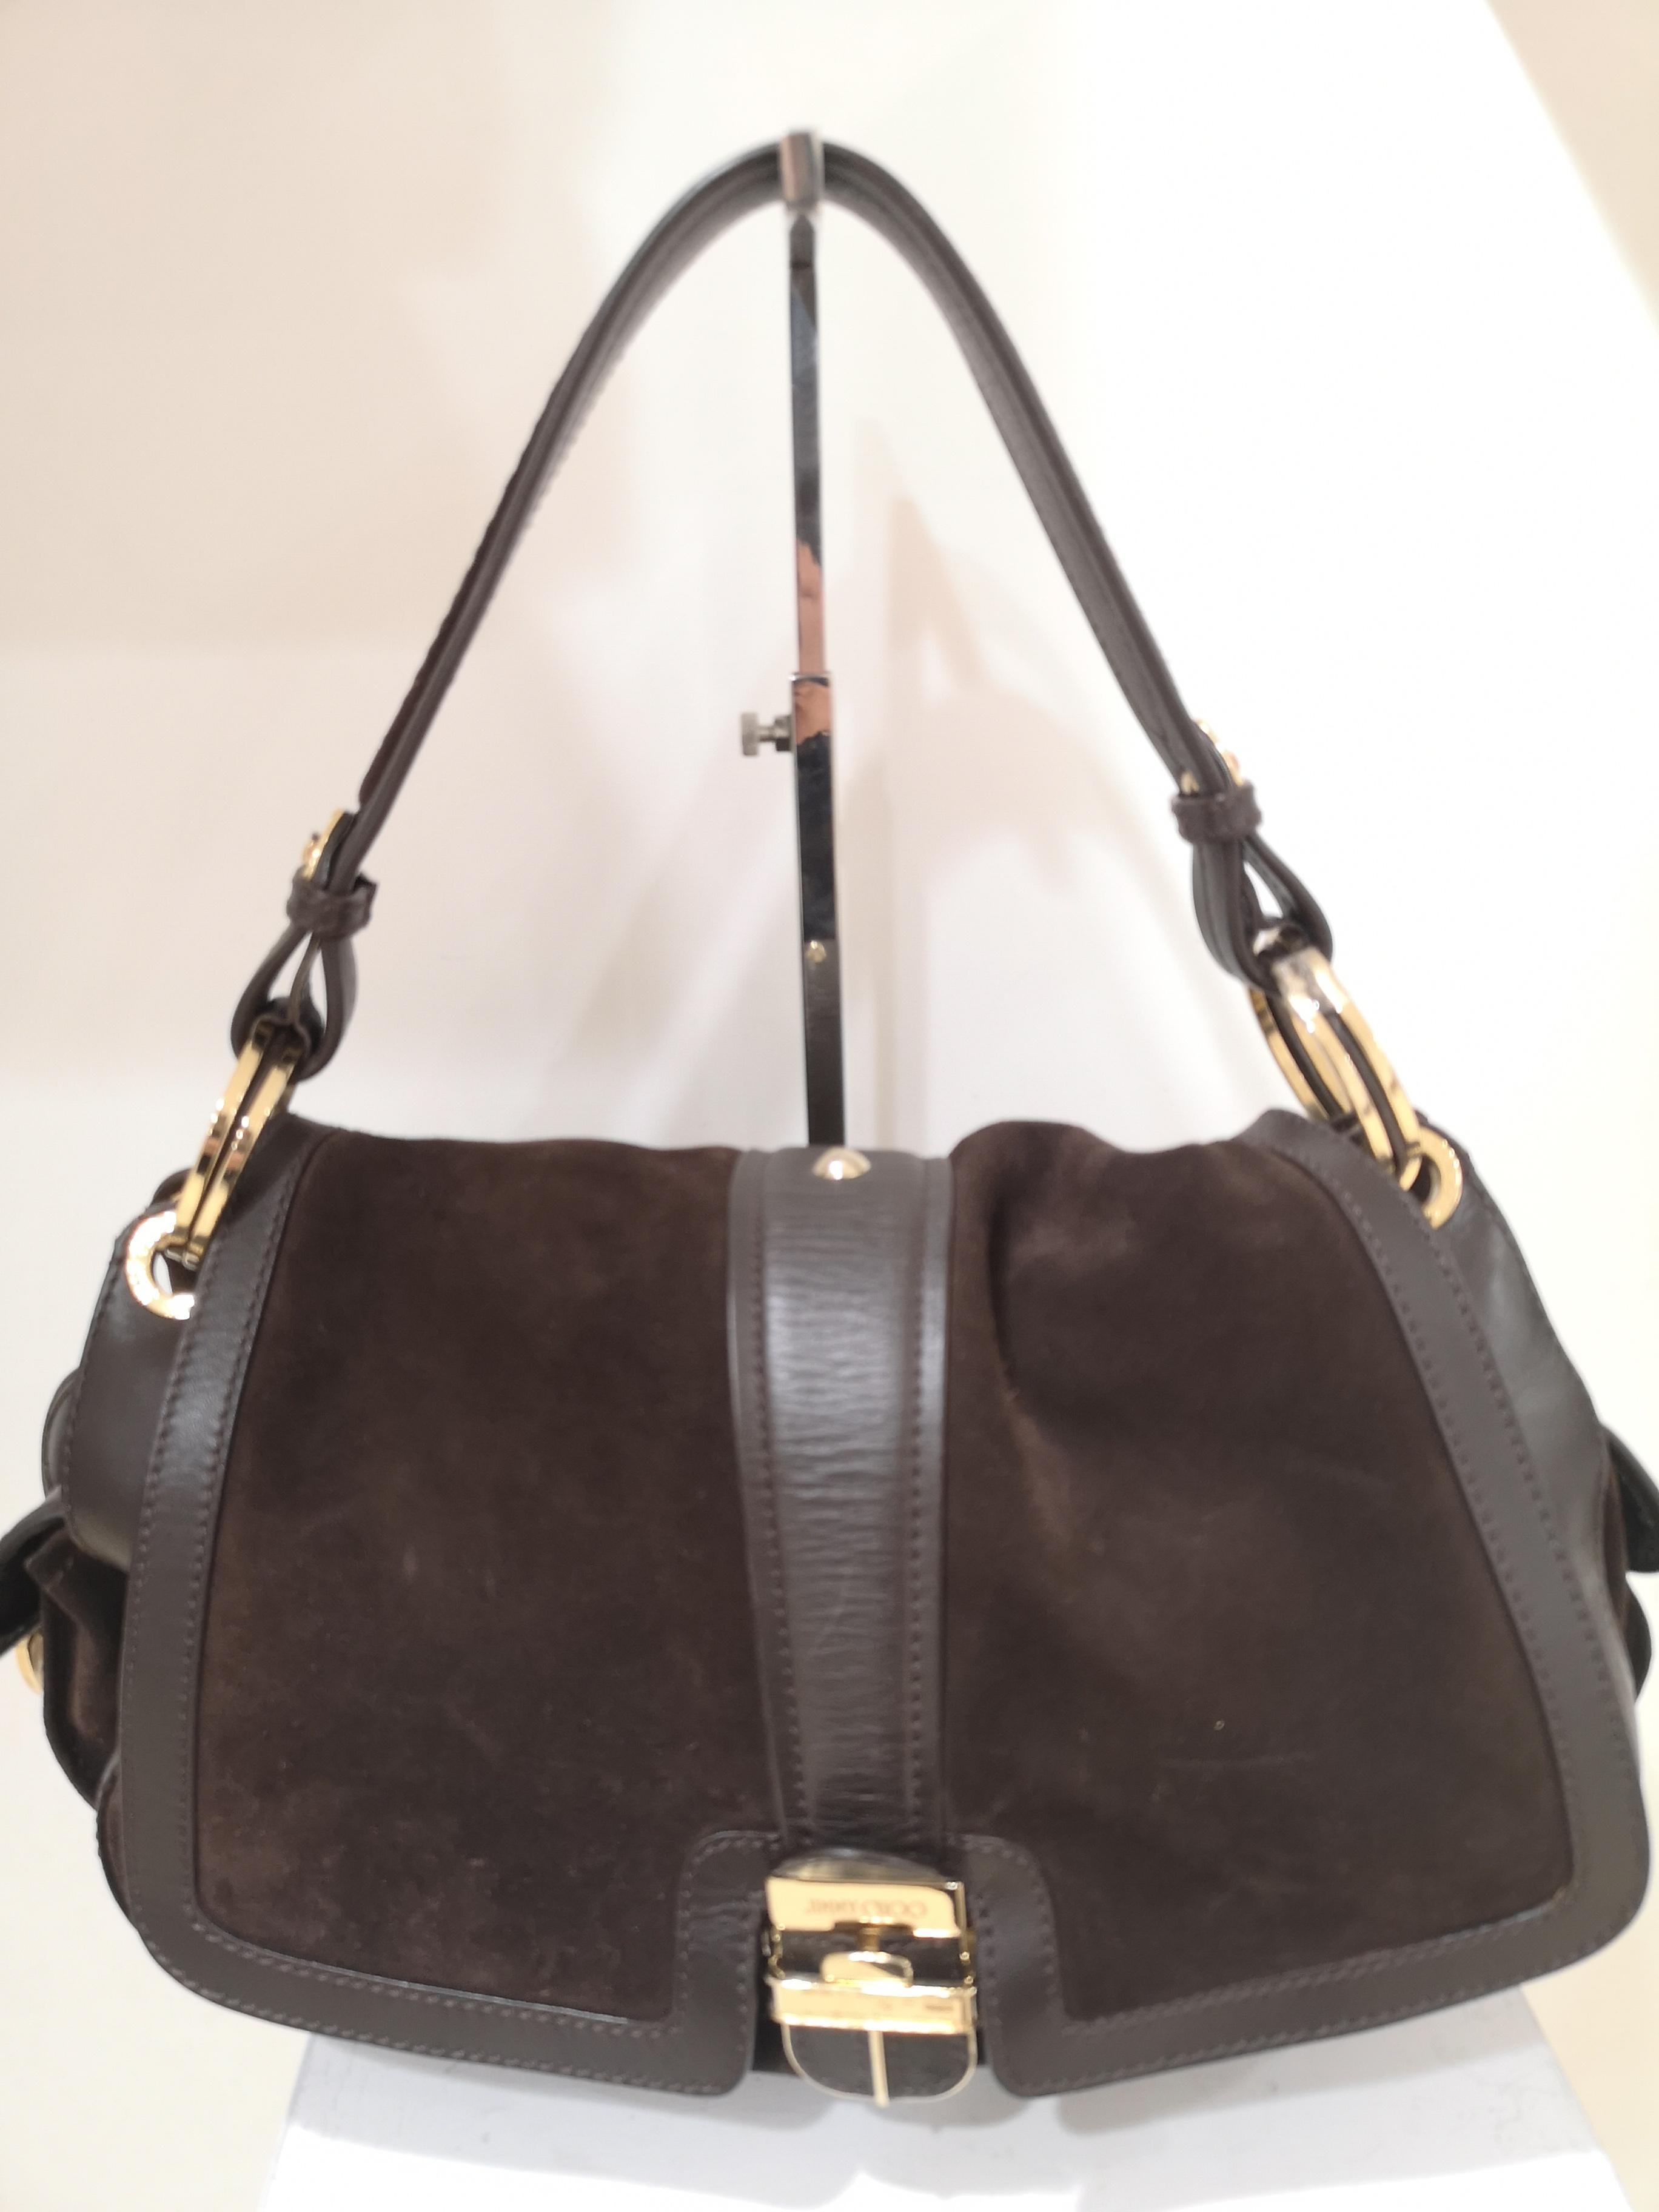 Women's Jimmy Choo brown suede and leather handle shoulder bag